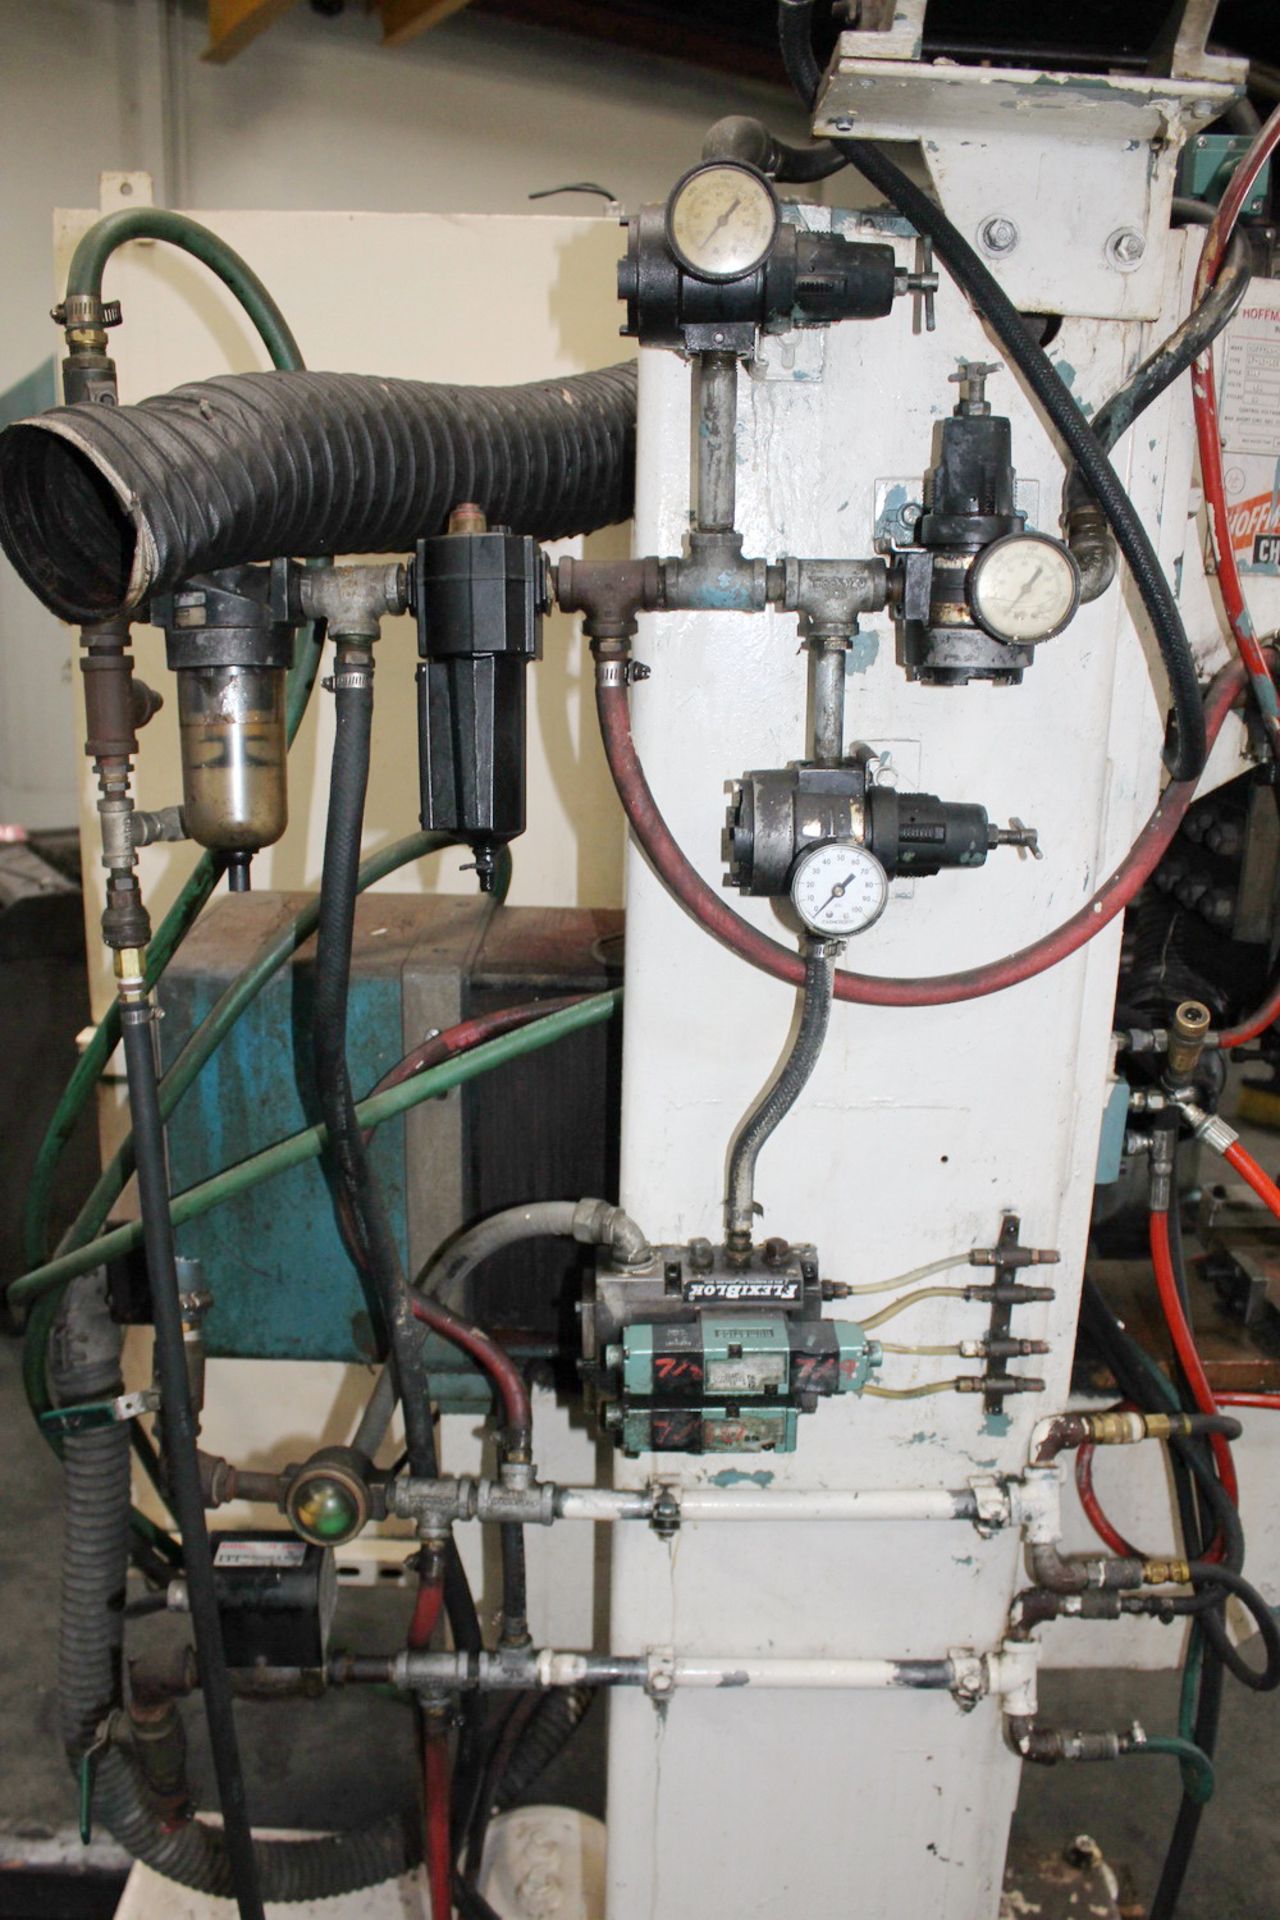 Hoffman Press Type Spot Welder 125 KVA x 14''. LOADING FEE FOR THIS LOT: $150 - Image 13 of 18